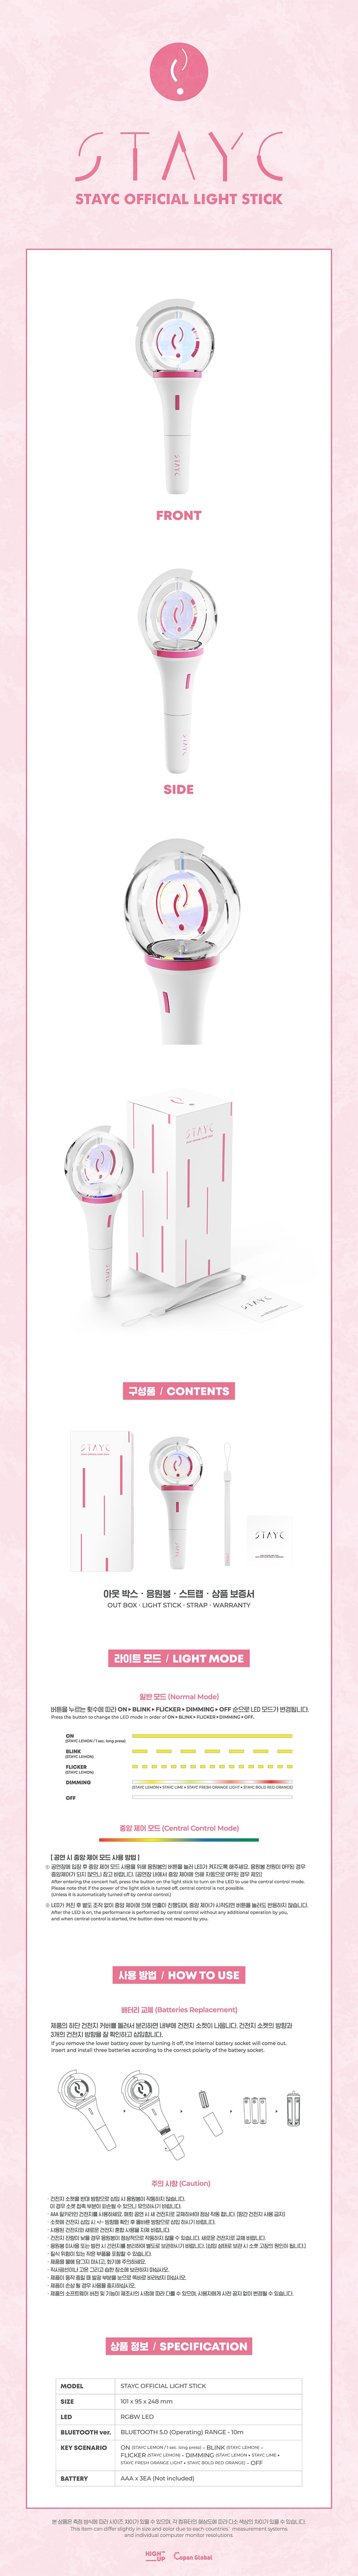 STAYC Official Light Stick